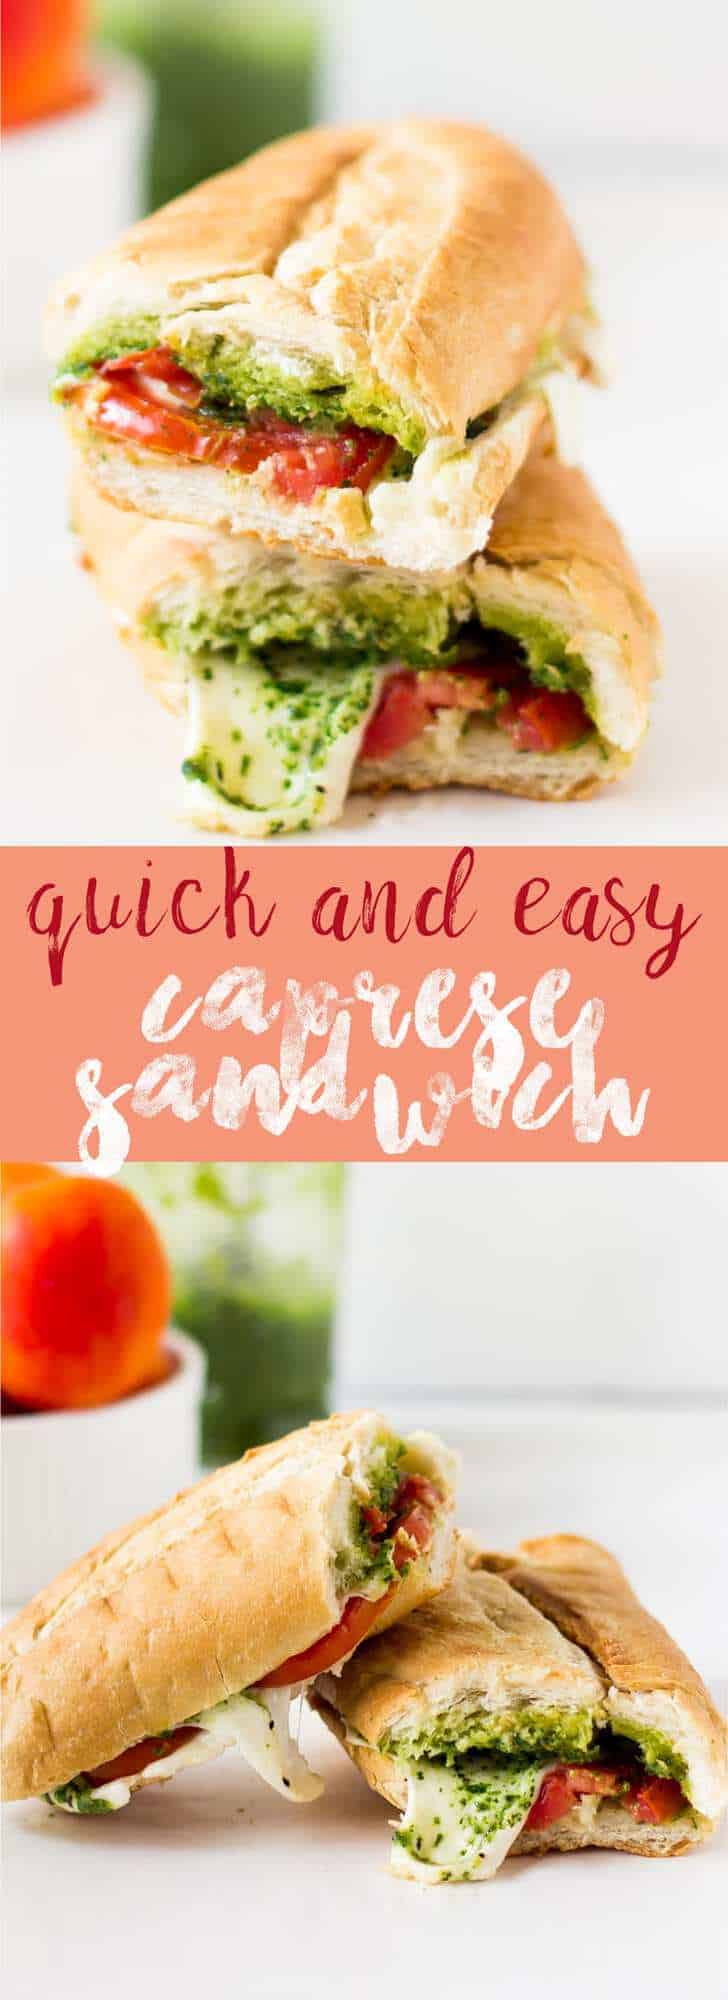 This Caprese Sandwich takes a twist by being toasted with melted mozzarella, and creamy parsley pesto. The sandwich is perfect for an everyday lunch or a picnic! | https://jessicainthekitchen.com